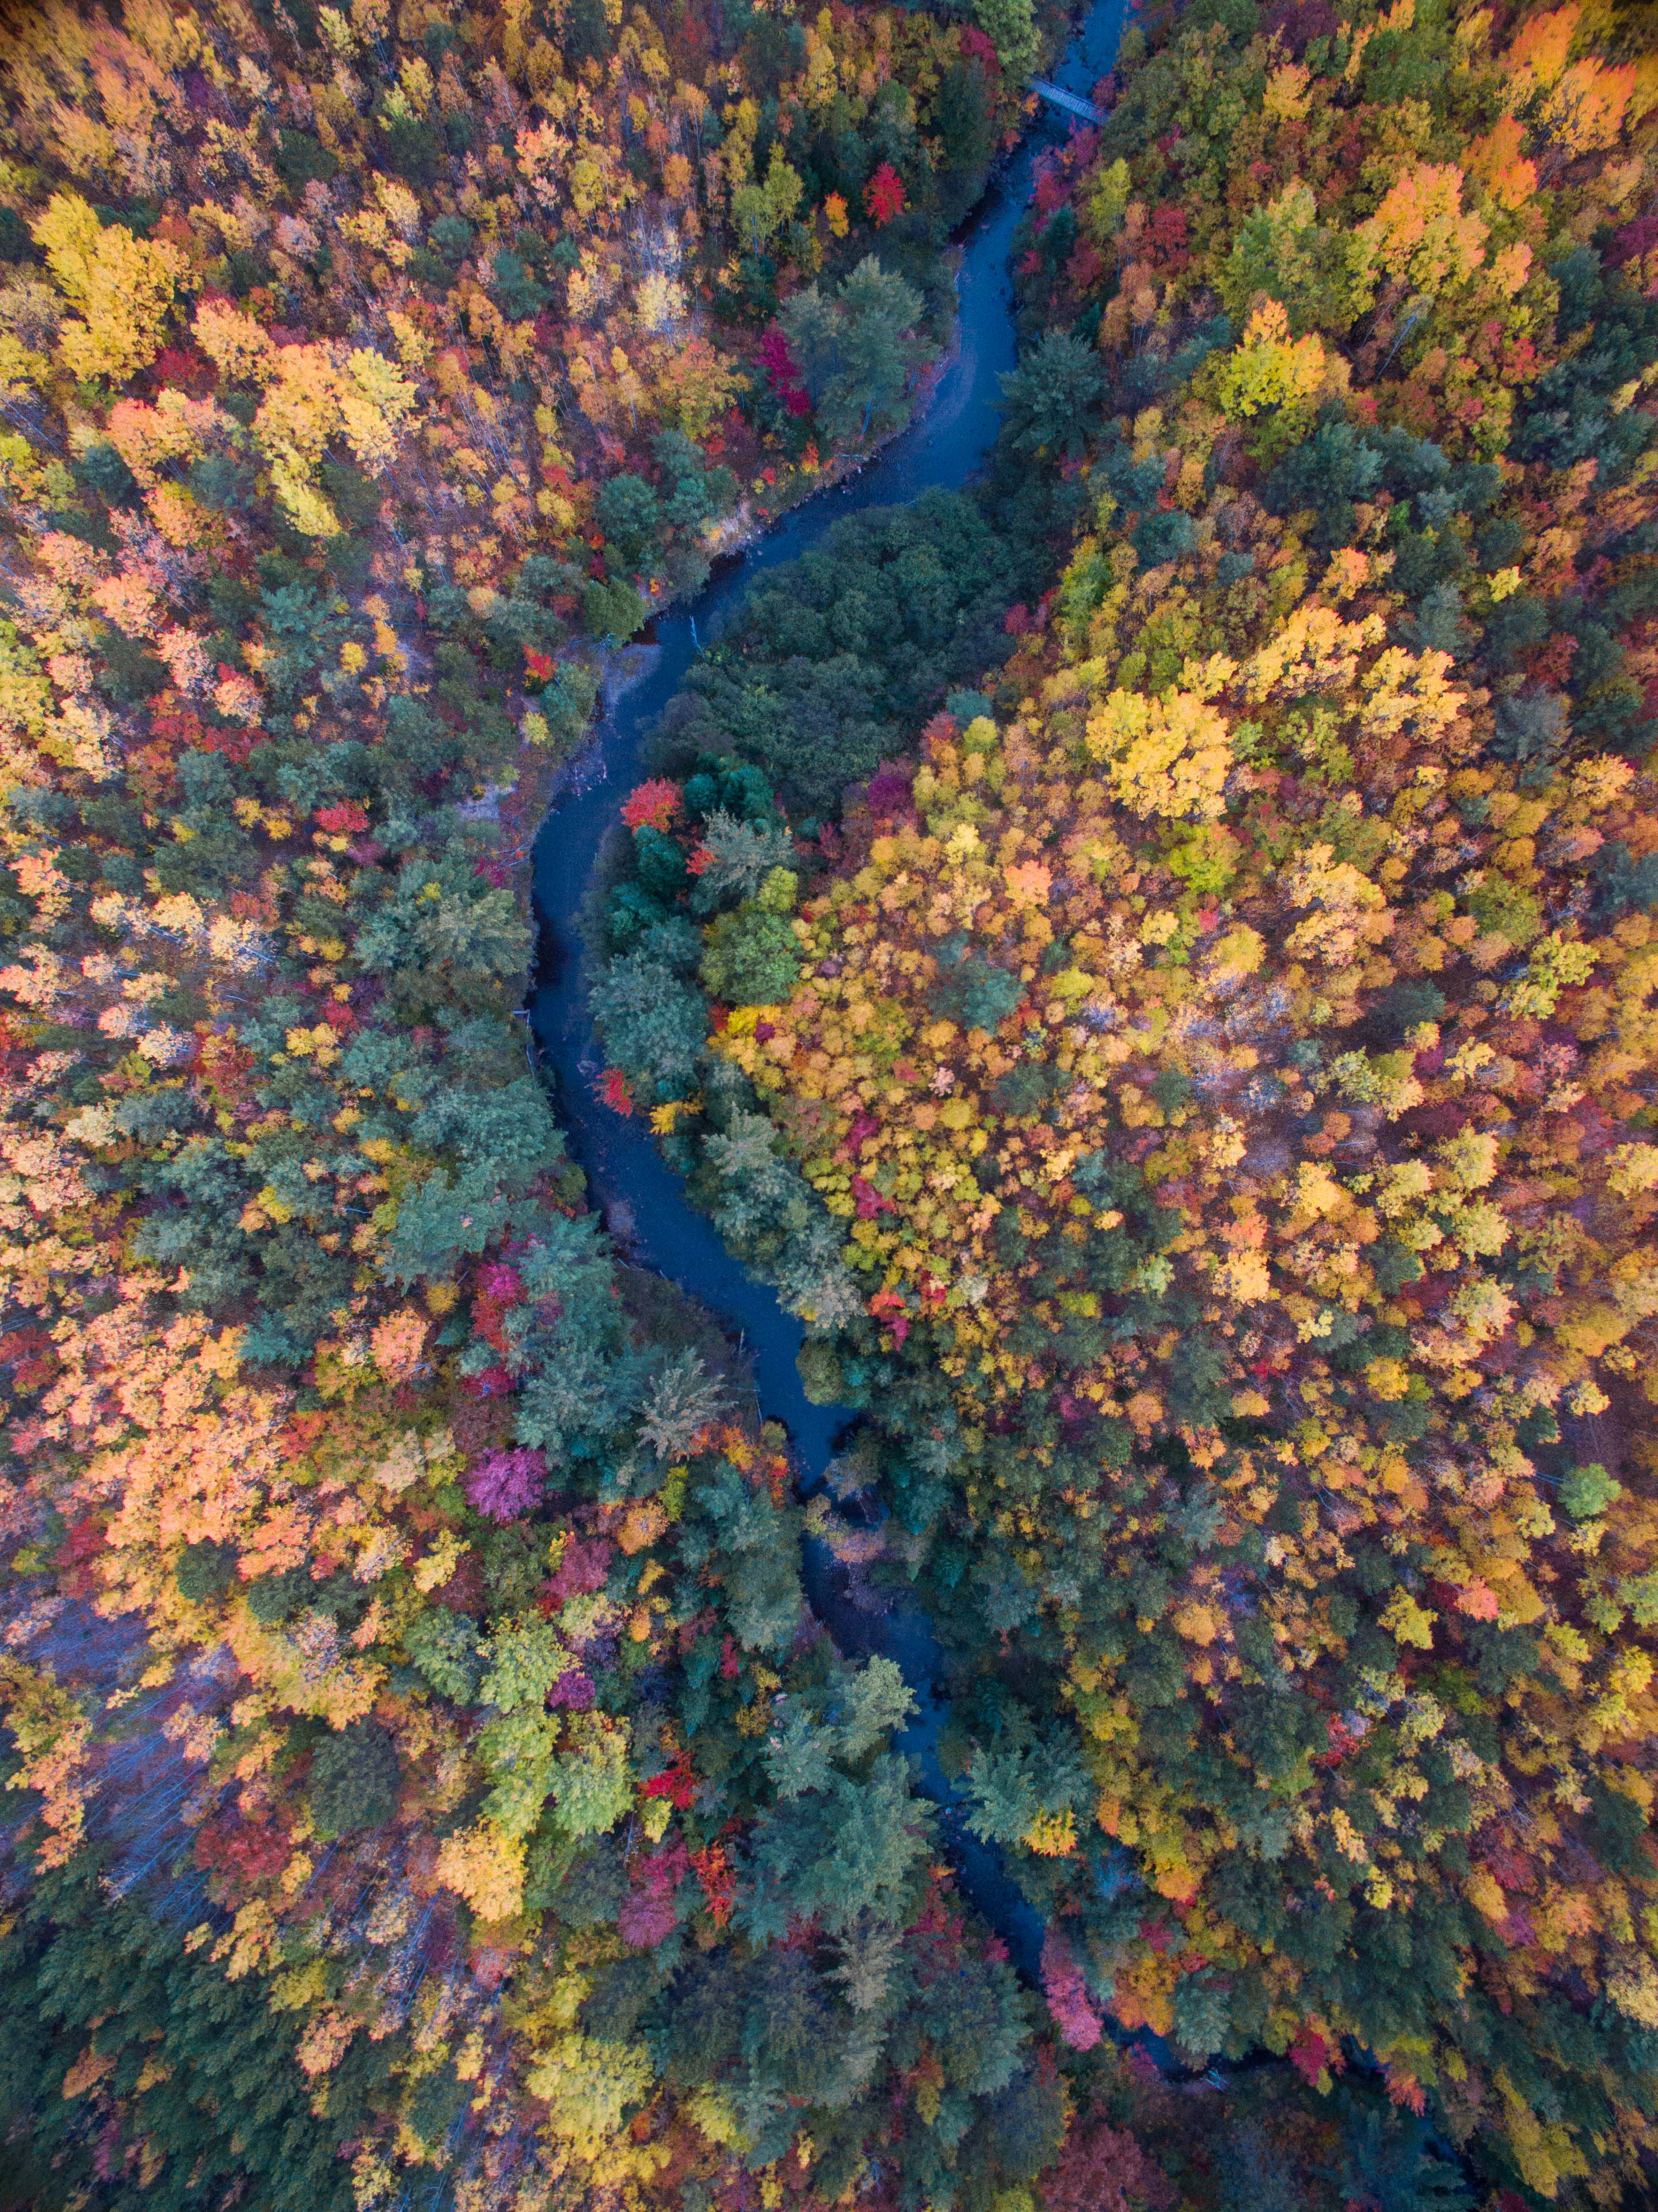 Fall Colors Line The Banks And Forest Surrounding KataHDin Stream